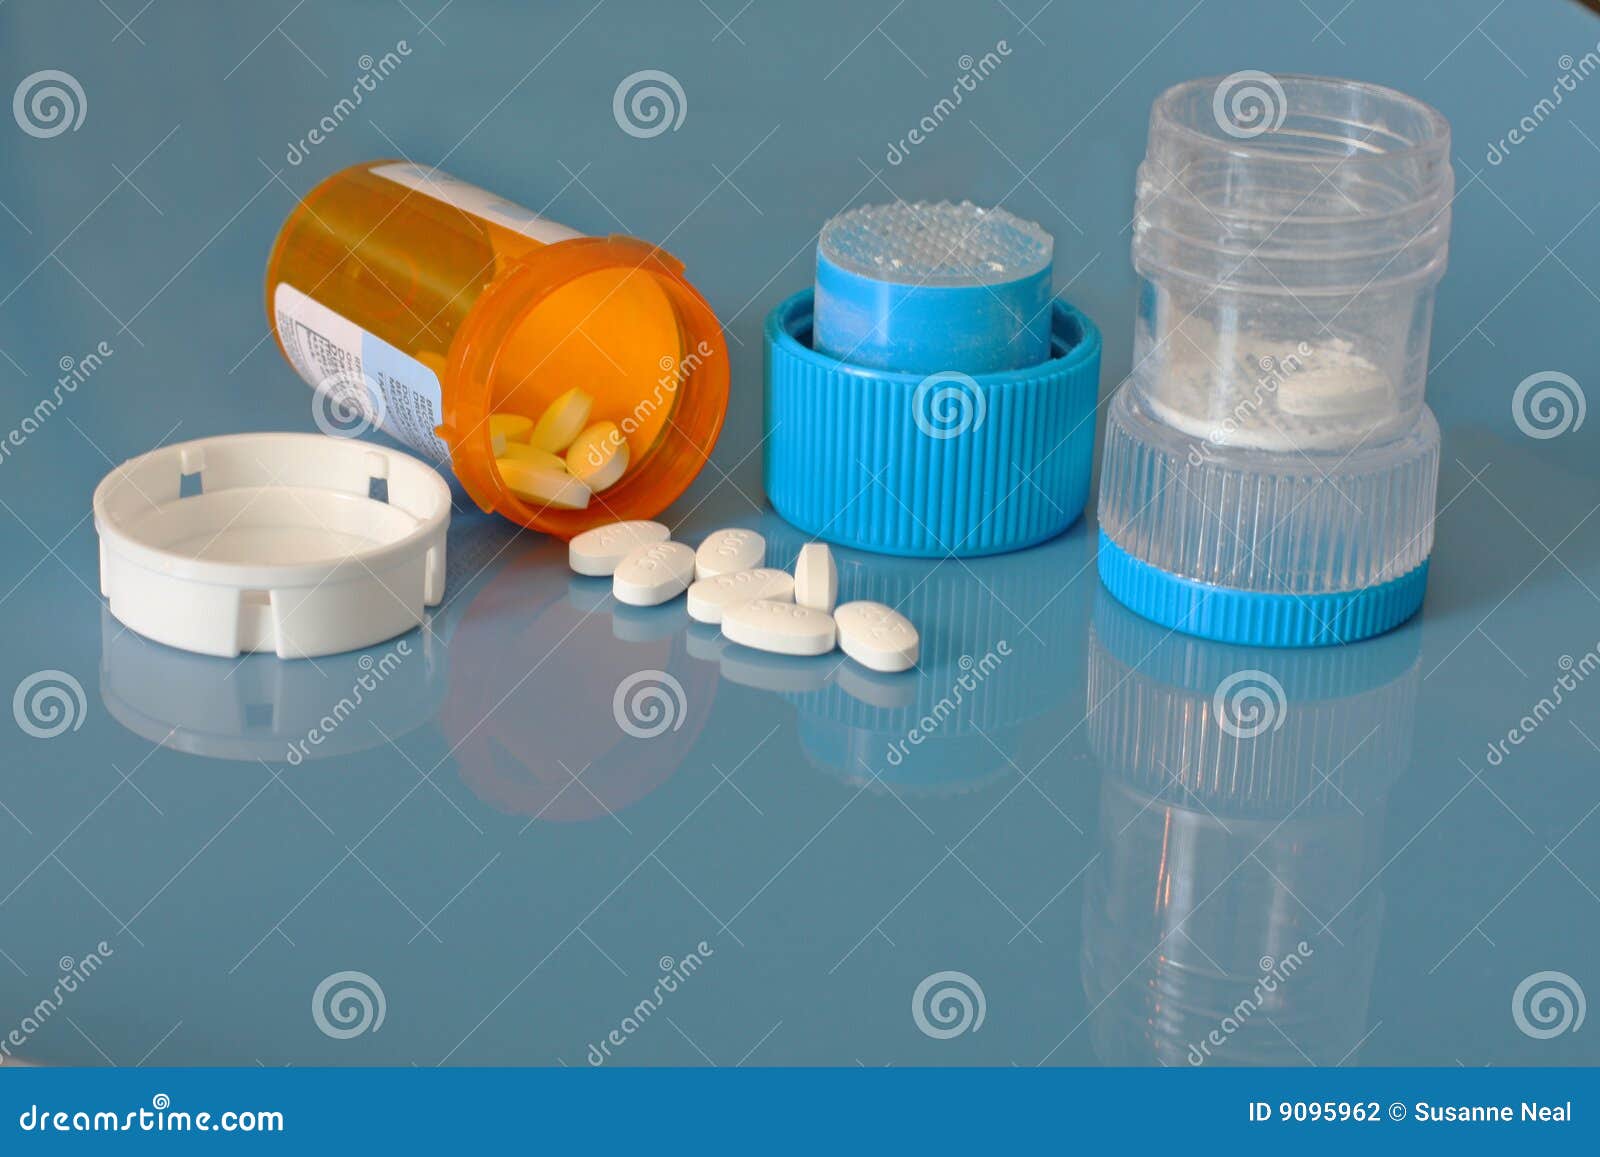 pill crusher and prescription bottle with pills